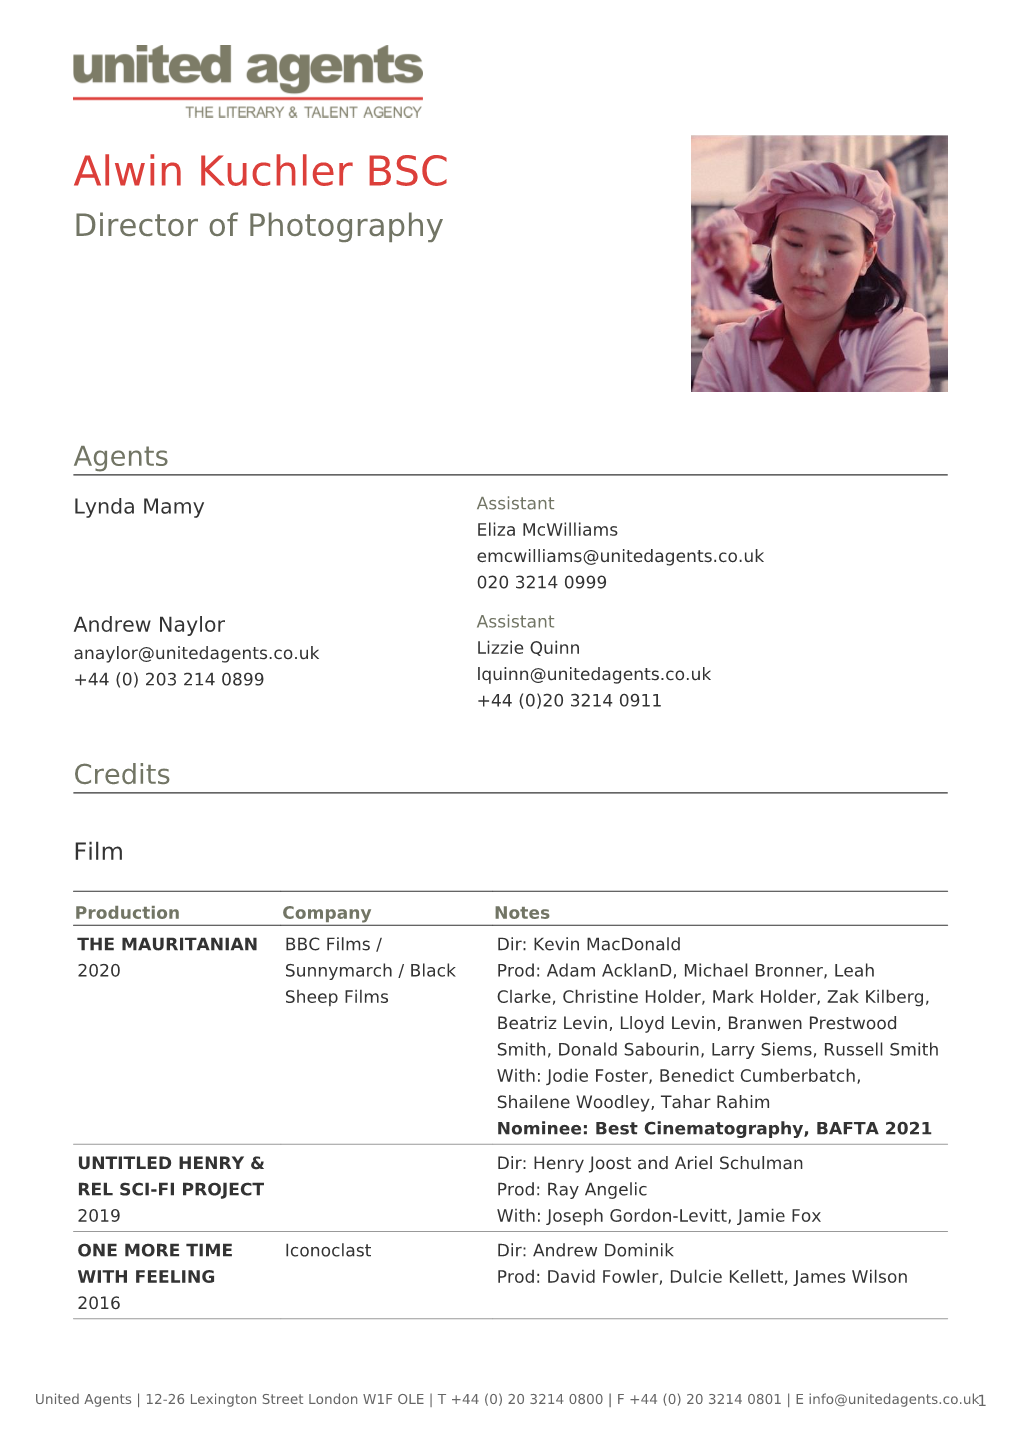 Alwin Kuchler BSC Director of Photography